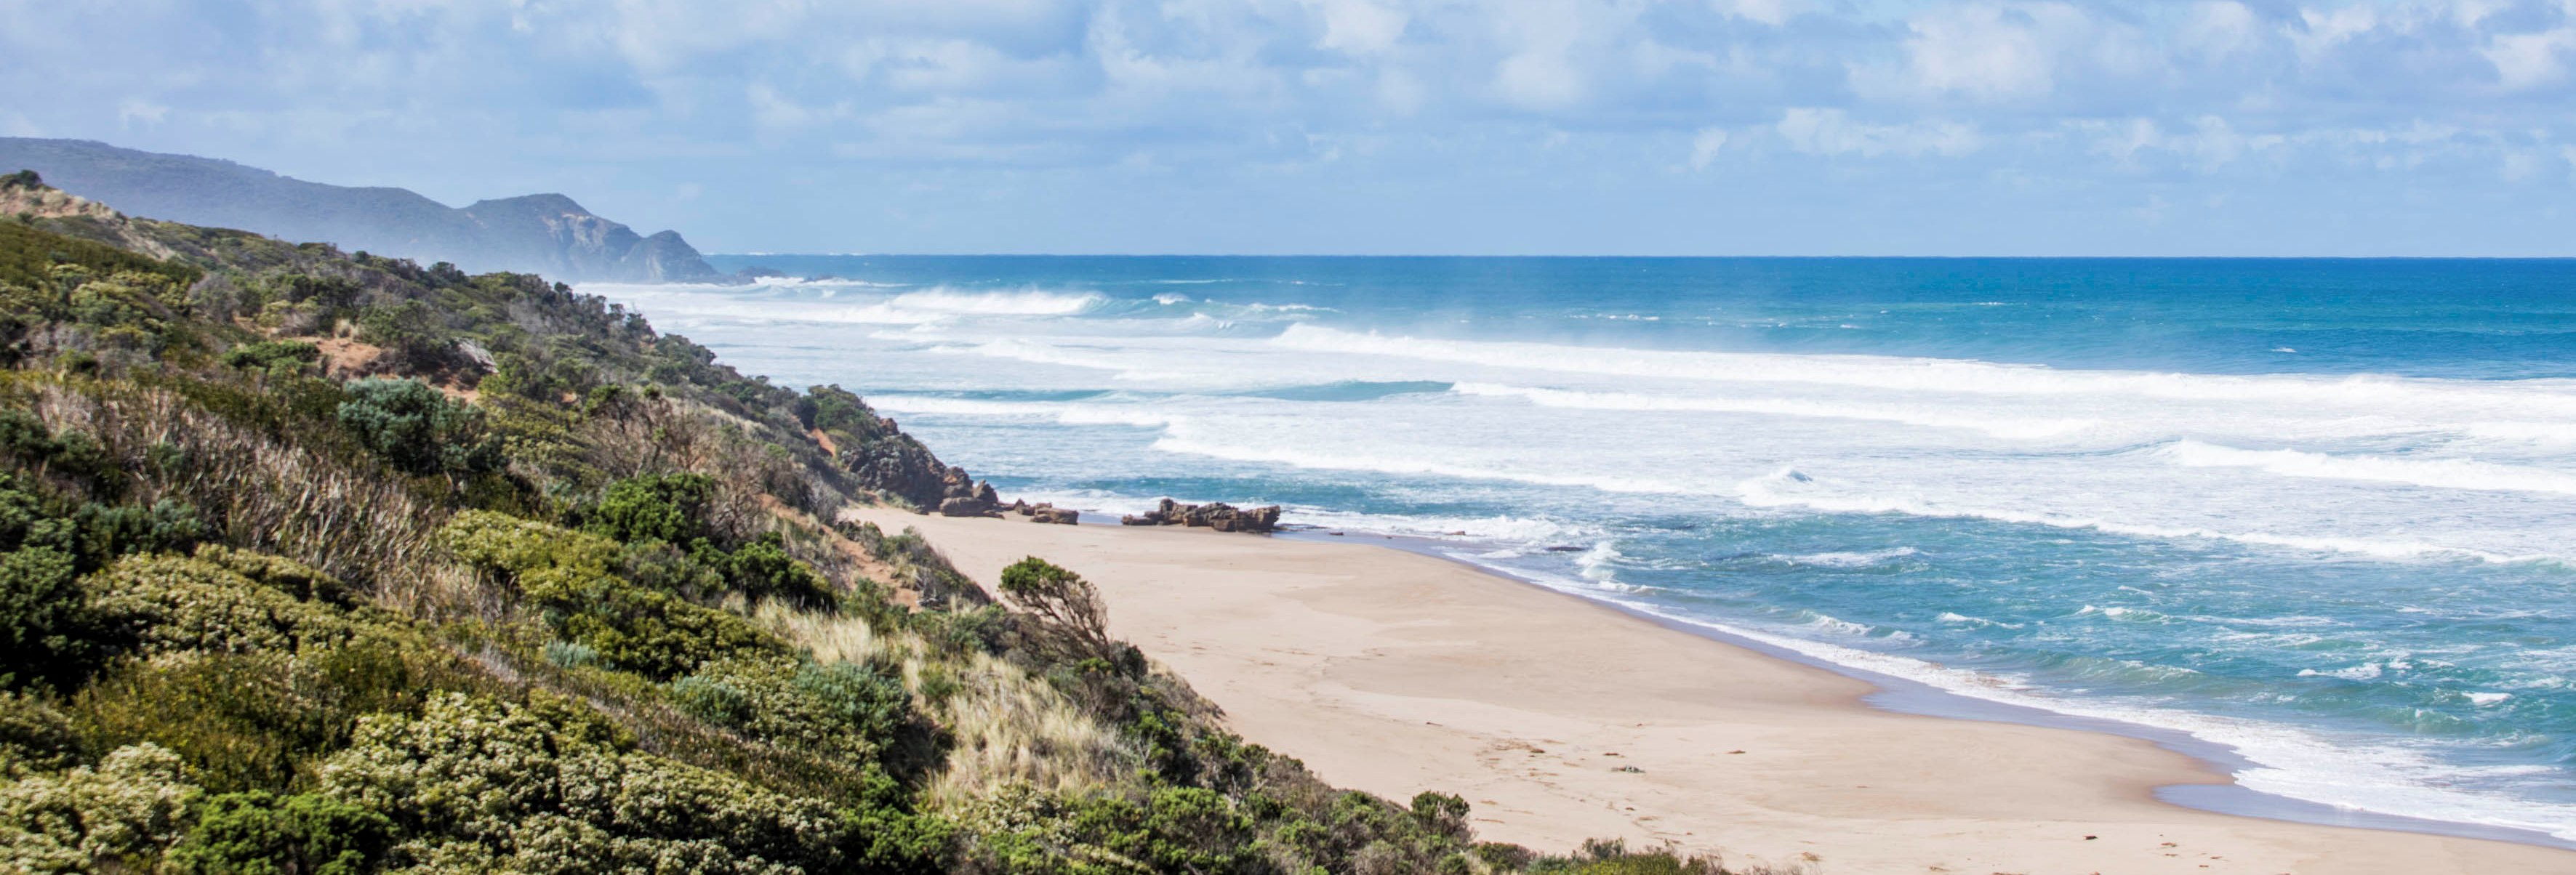 Summer Events On The Great Ocean Road